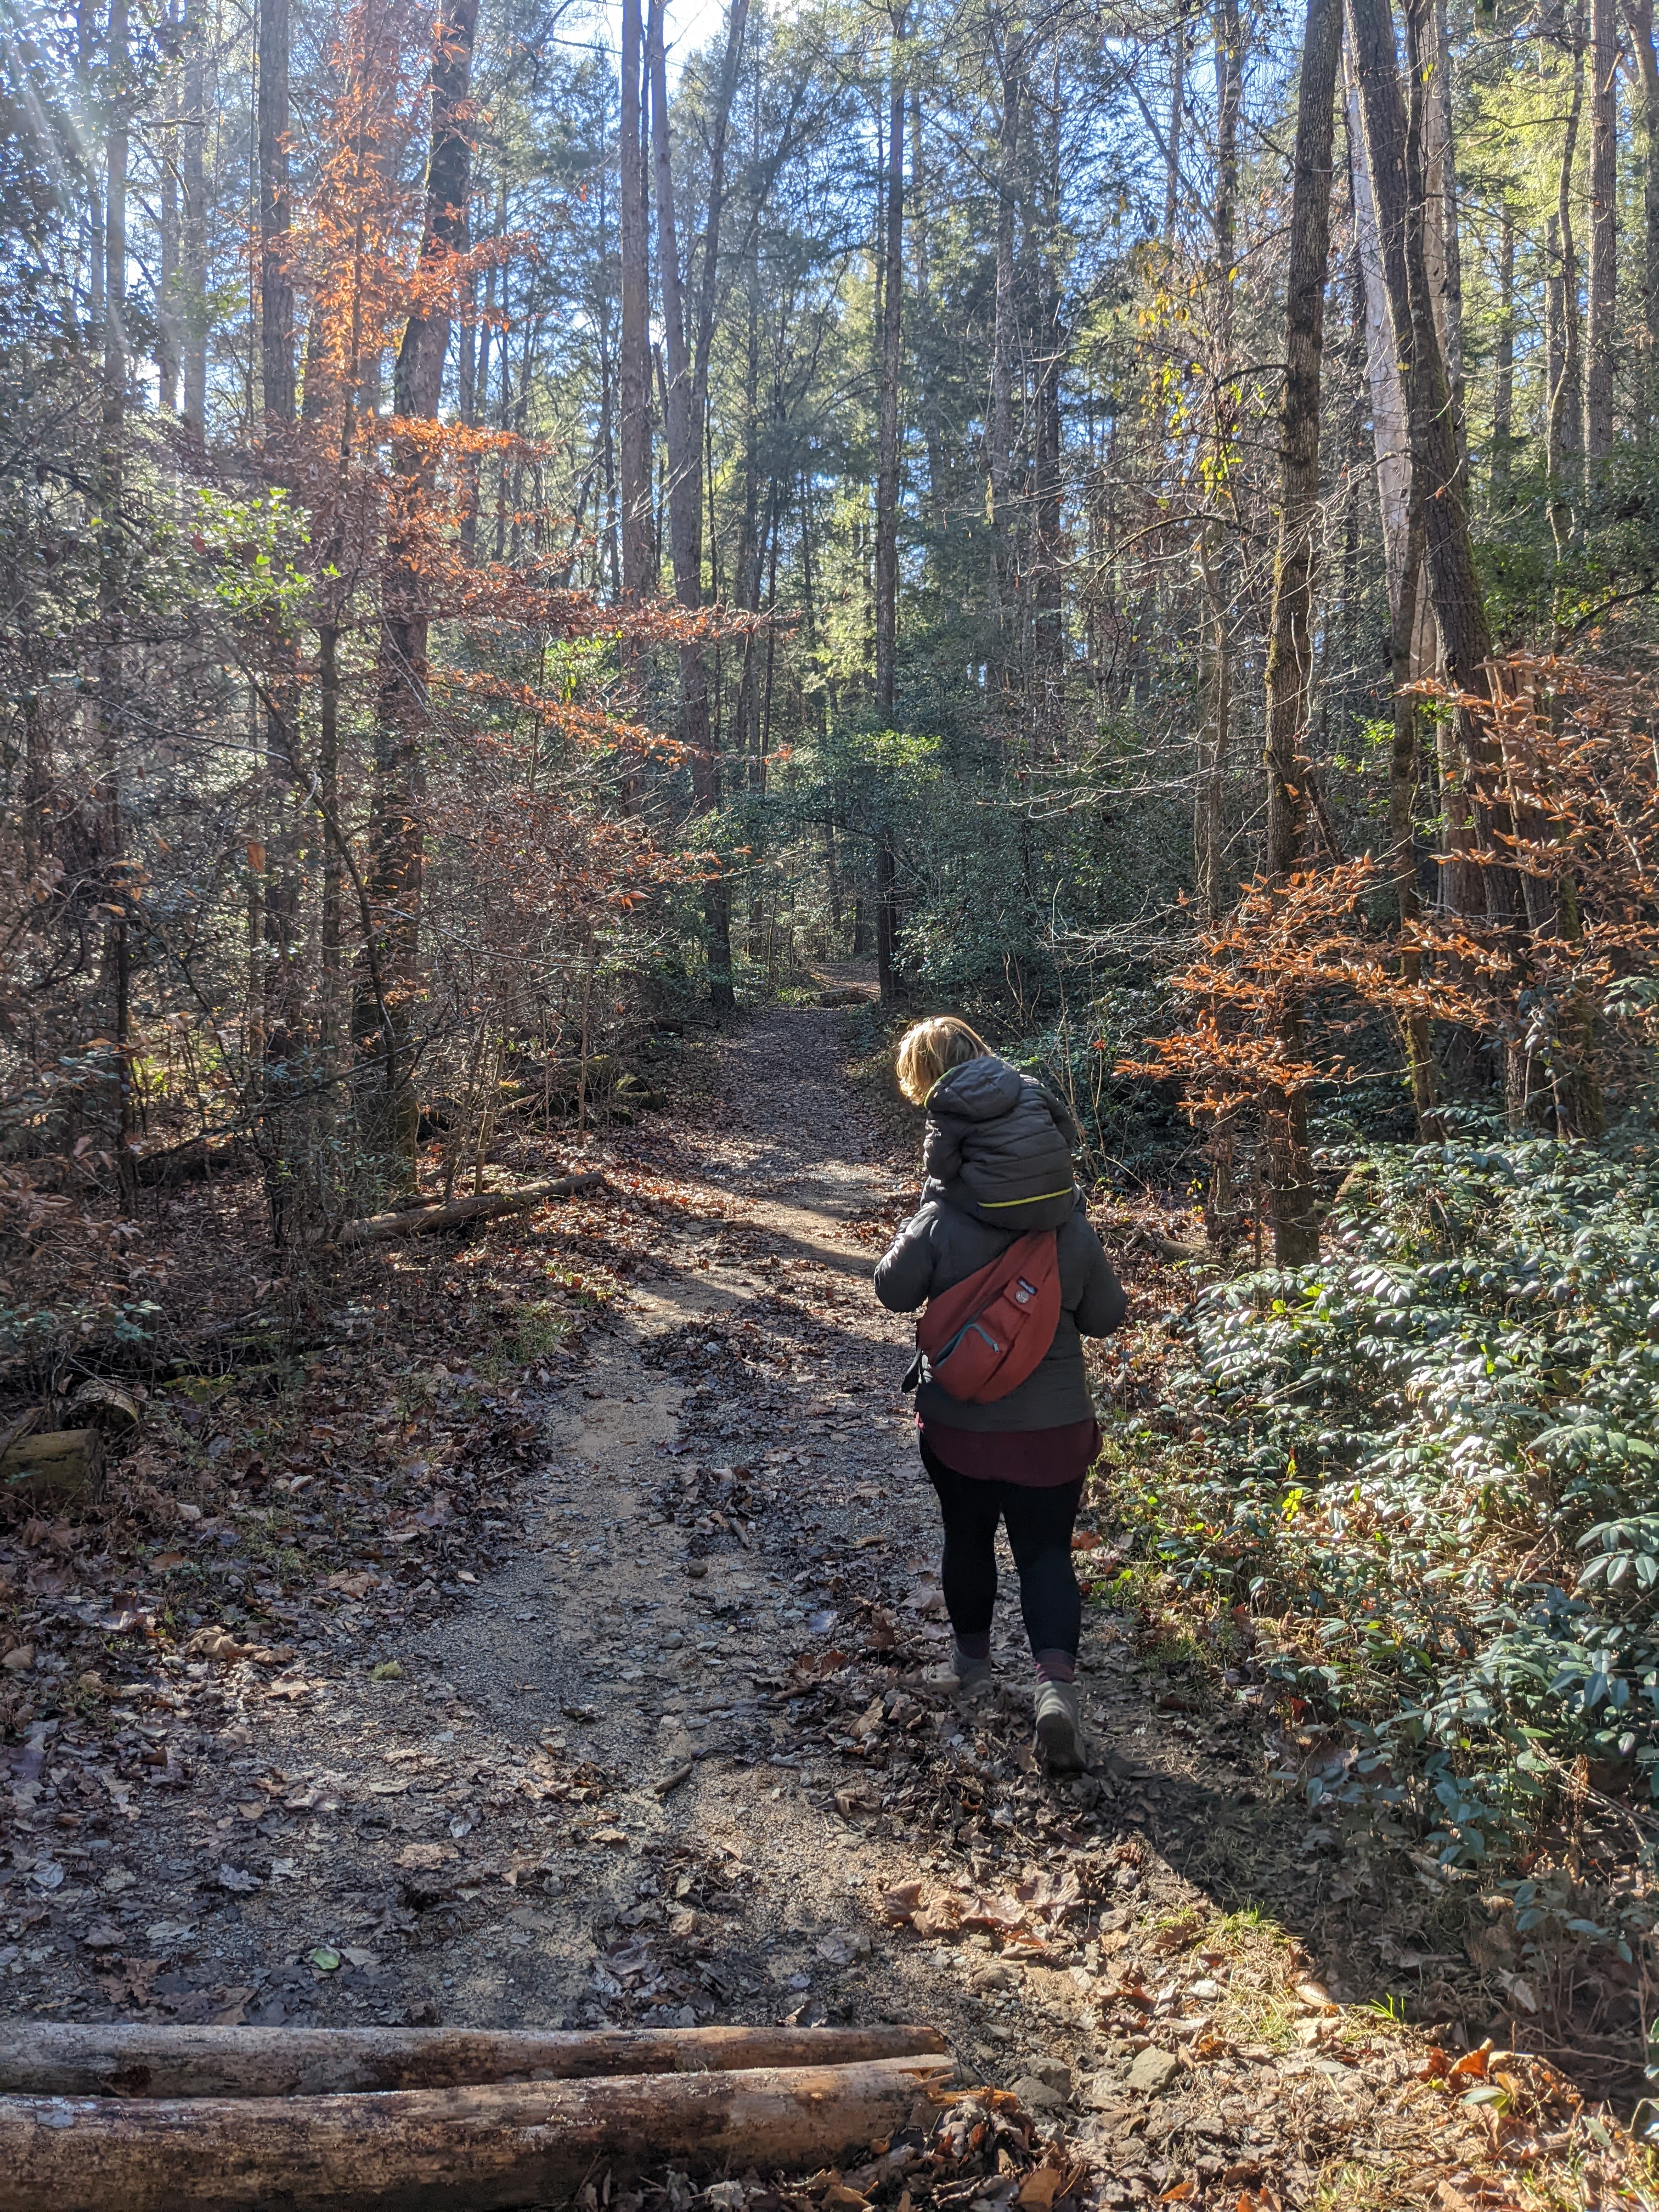 The Cane Creek Trail exiting the campground